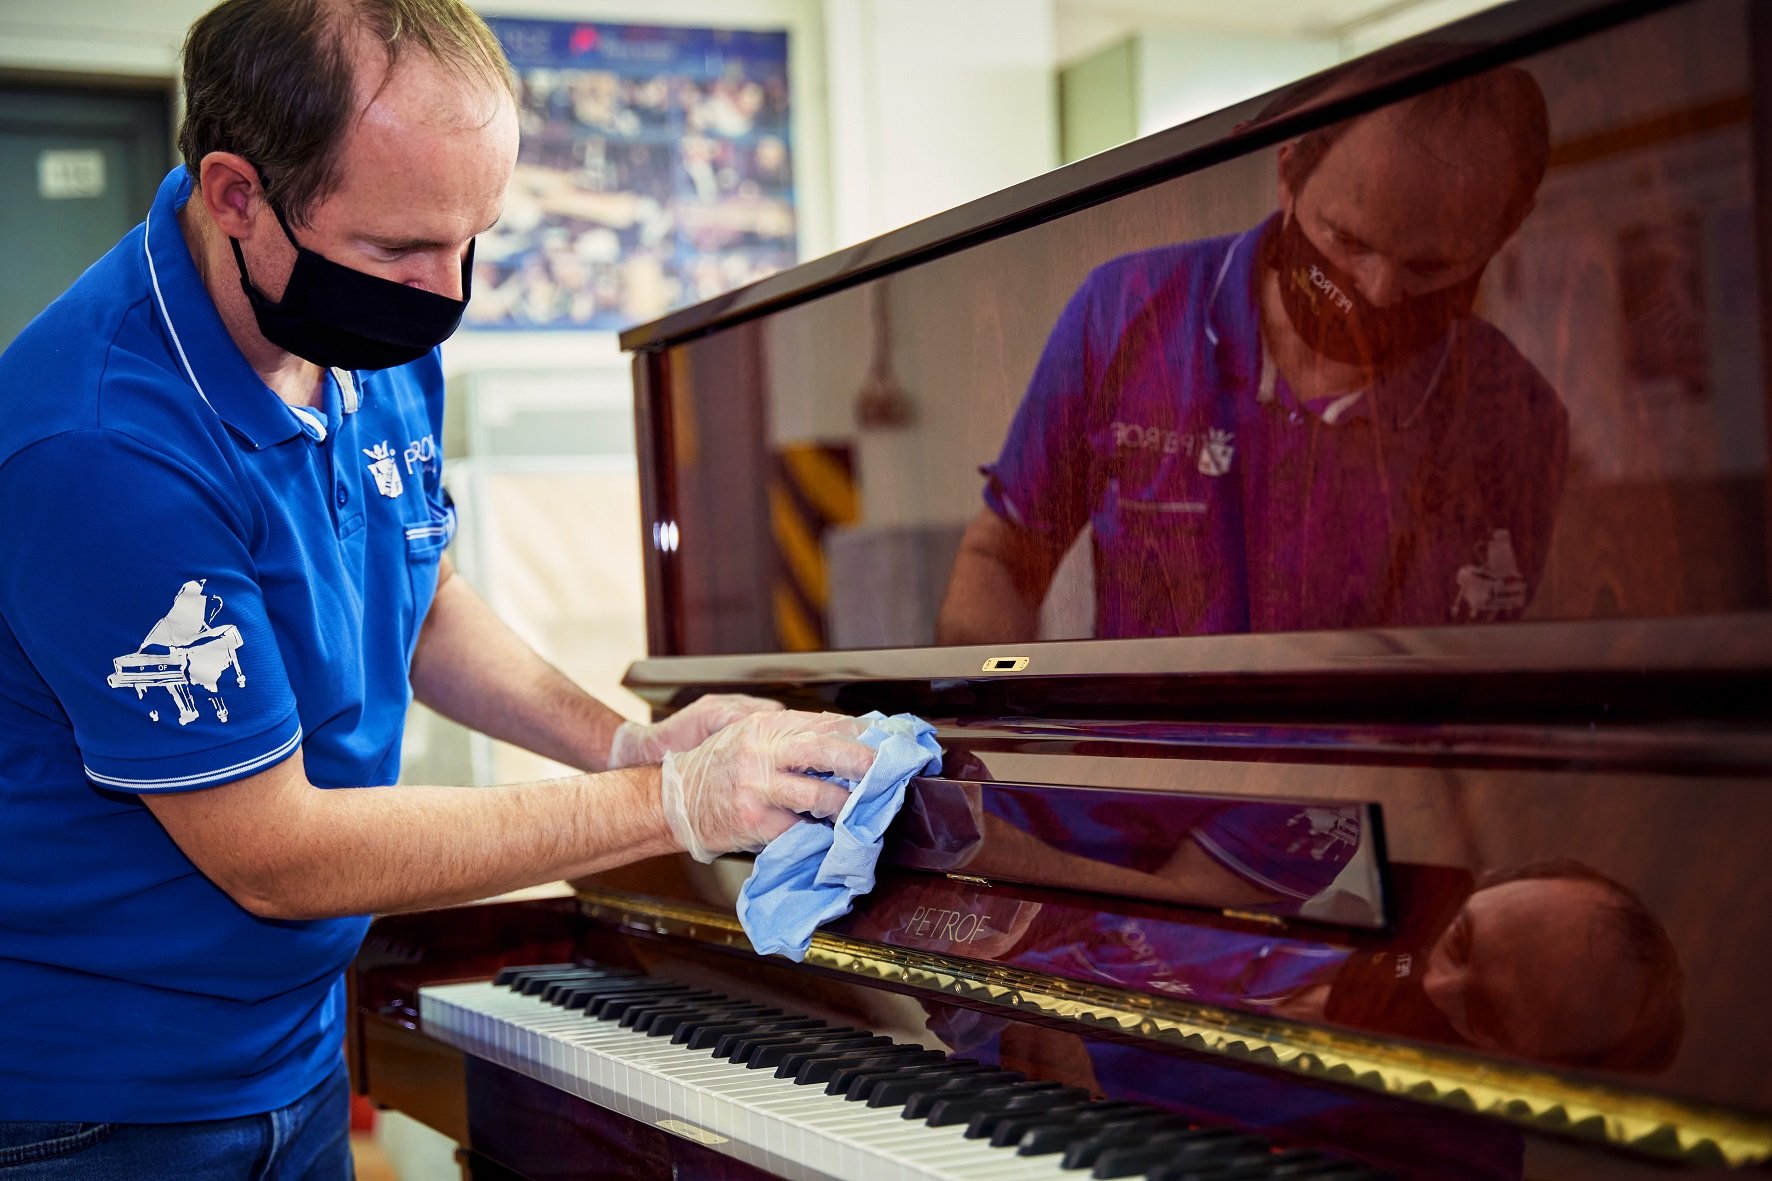 How to disinfect the piano